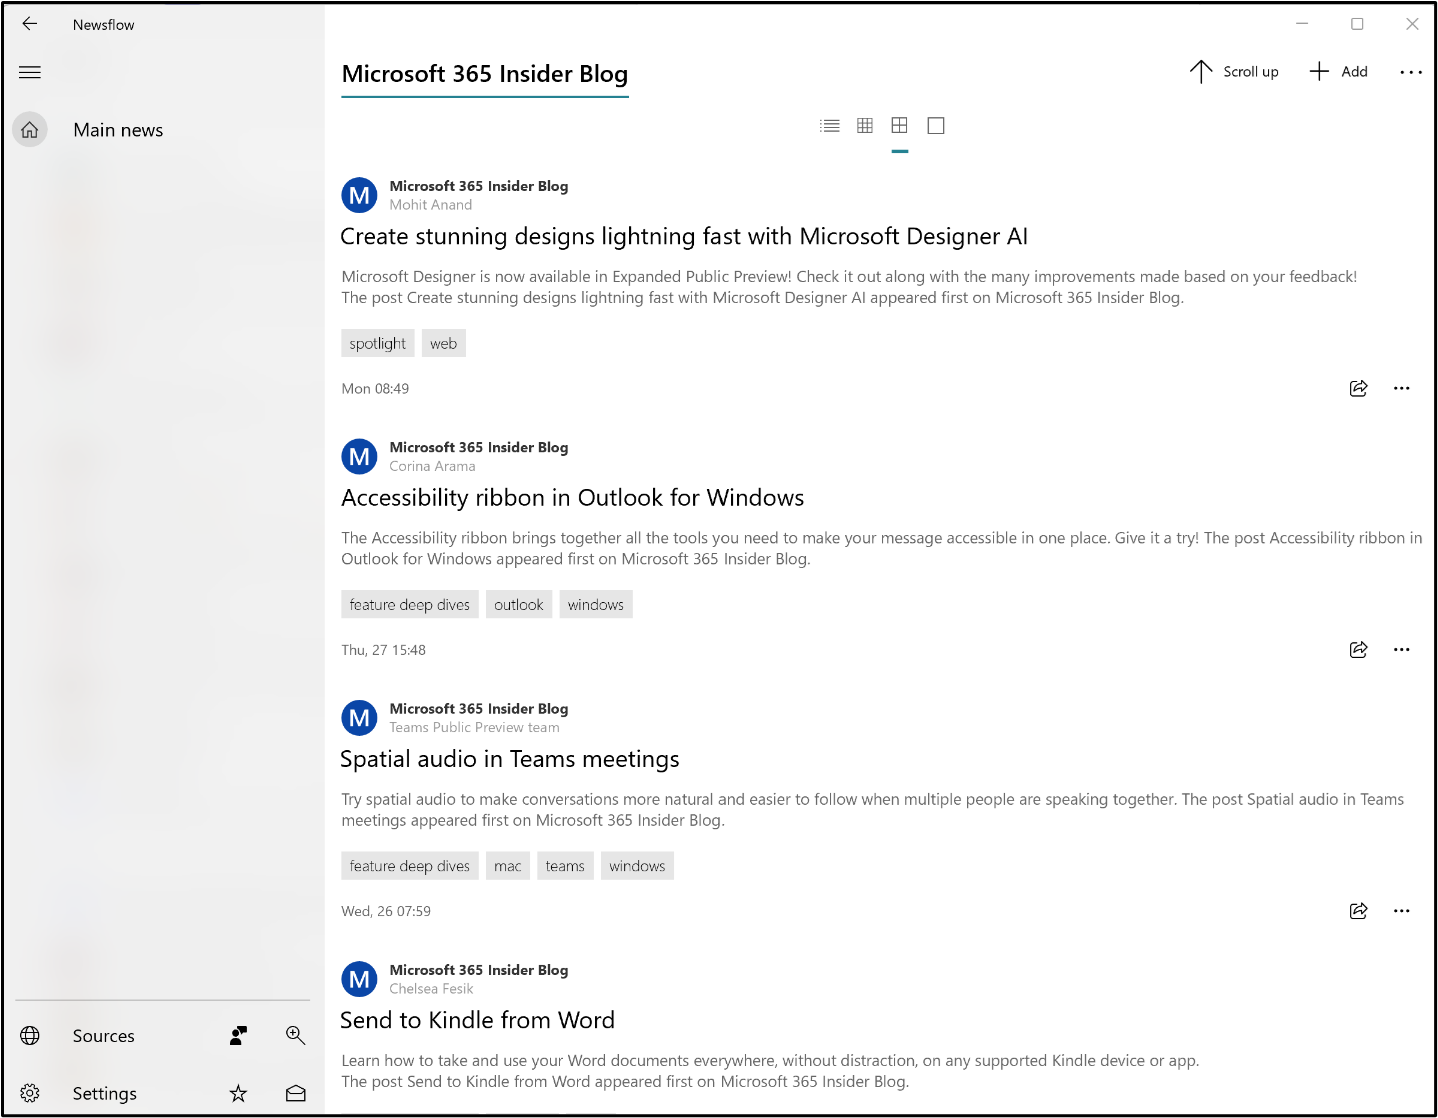 Microsoft 365 Insider Blog content shown in RSS feed reader